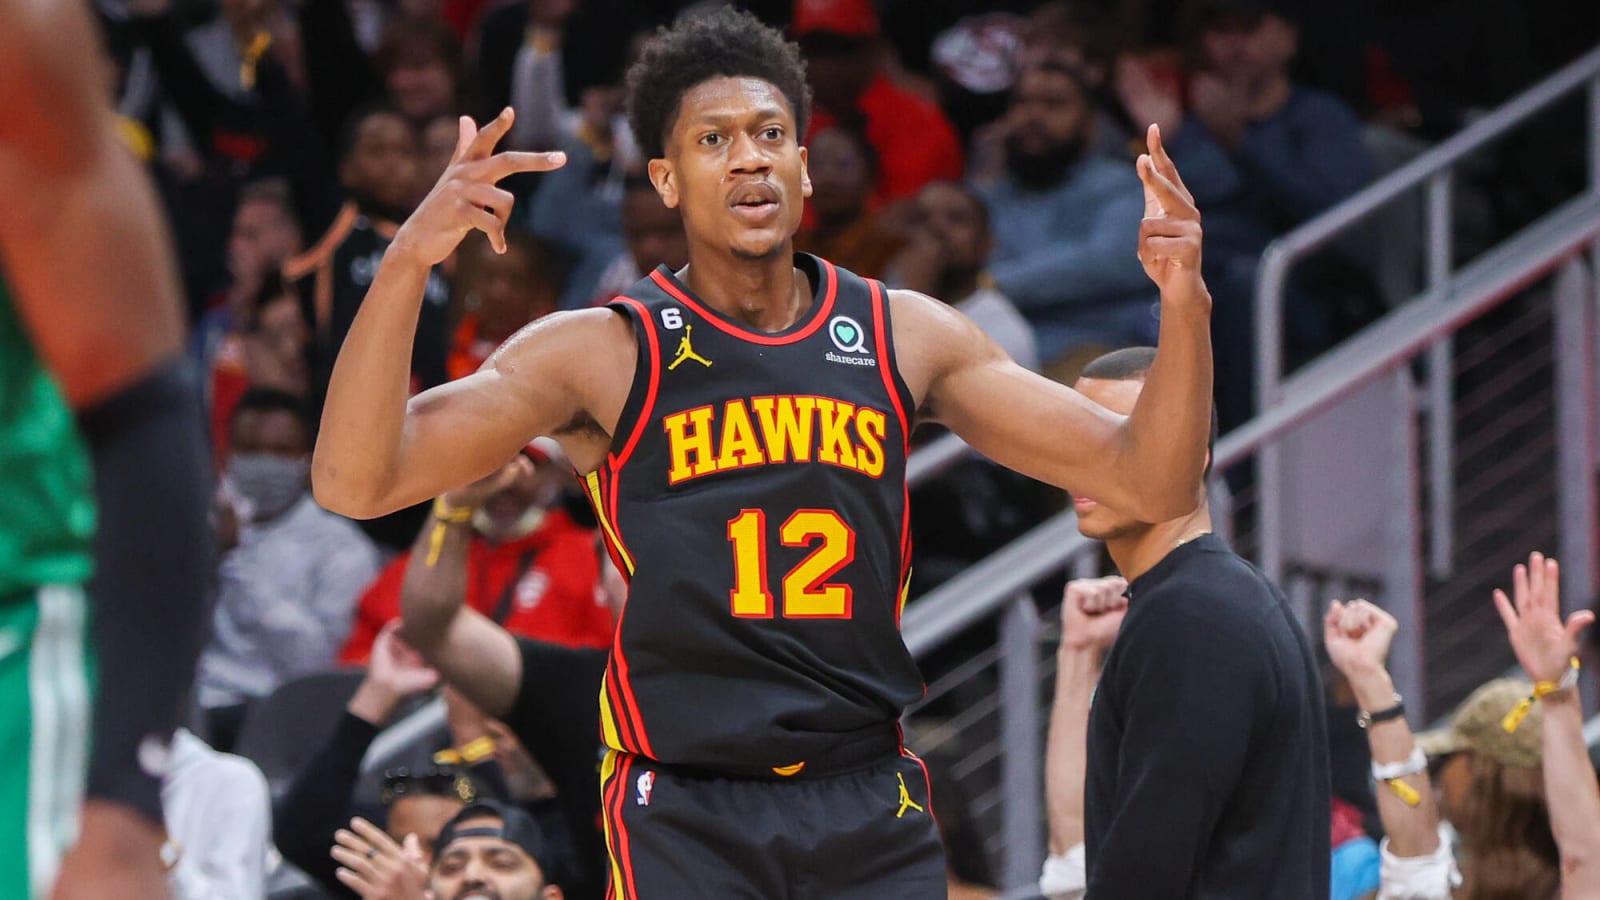 Hawks first-round pick lands on Bleacher Report’s most overrated players list